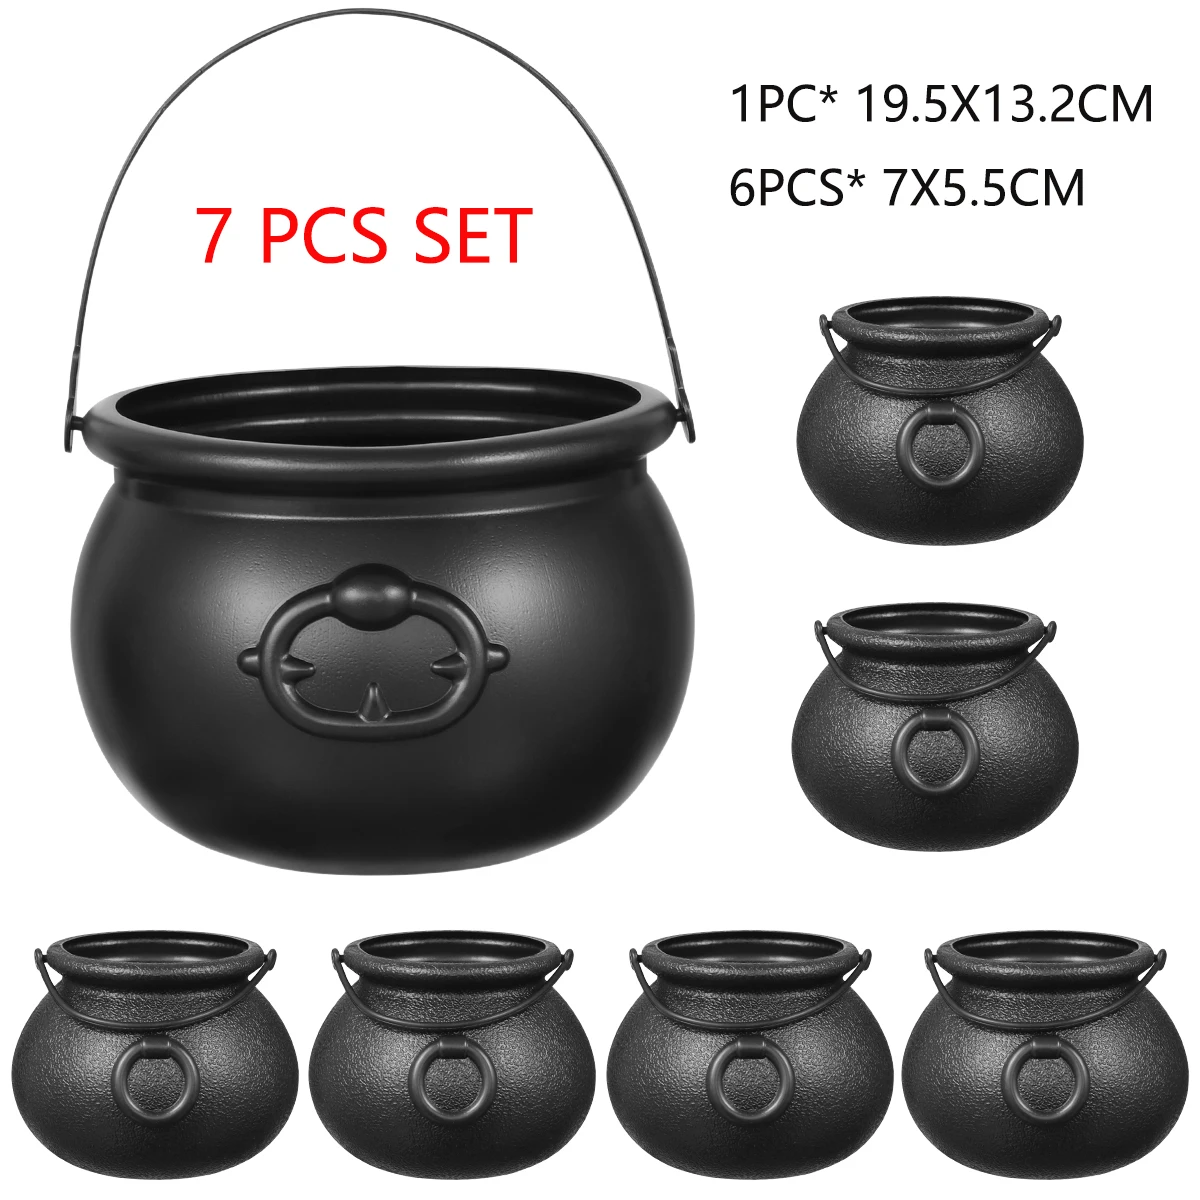 Black Cauldron Plastic Witch Skull Candy Bucket Jar Trick Or Treat Halloween Party Decorations Props for Kids Party Favors